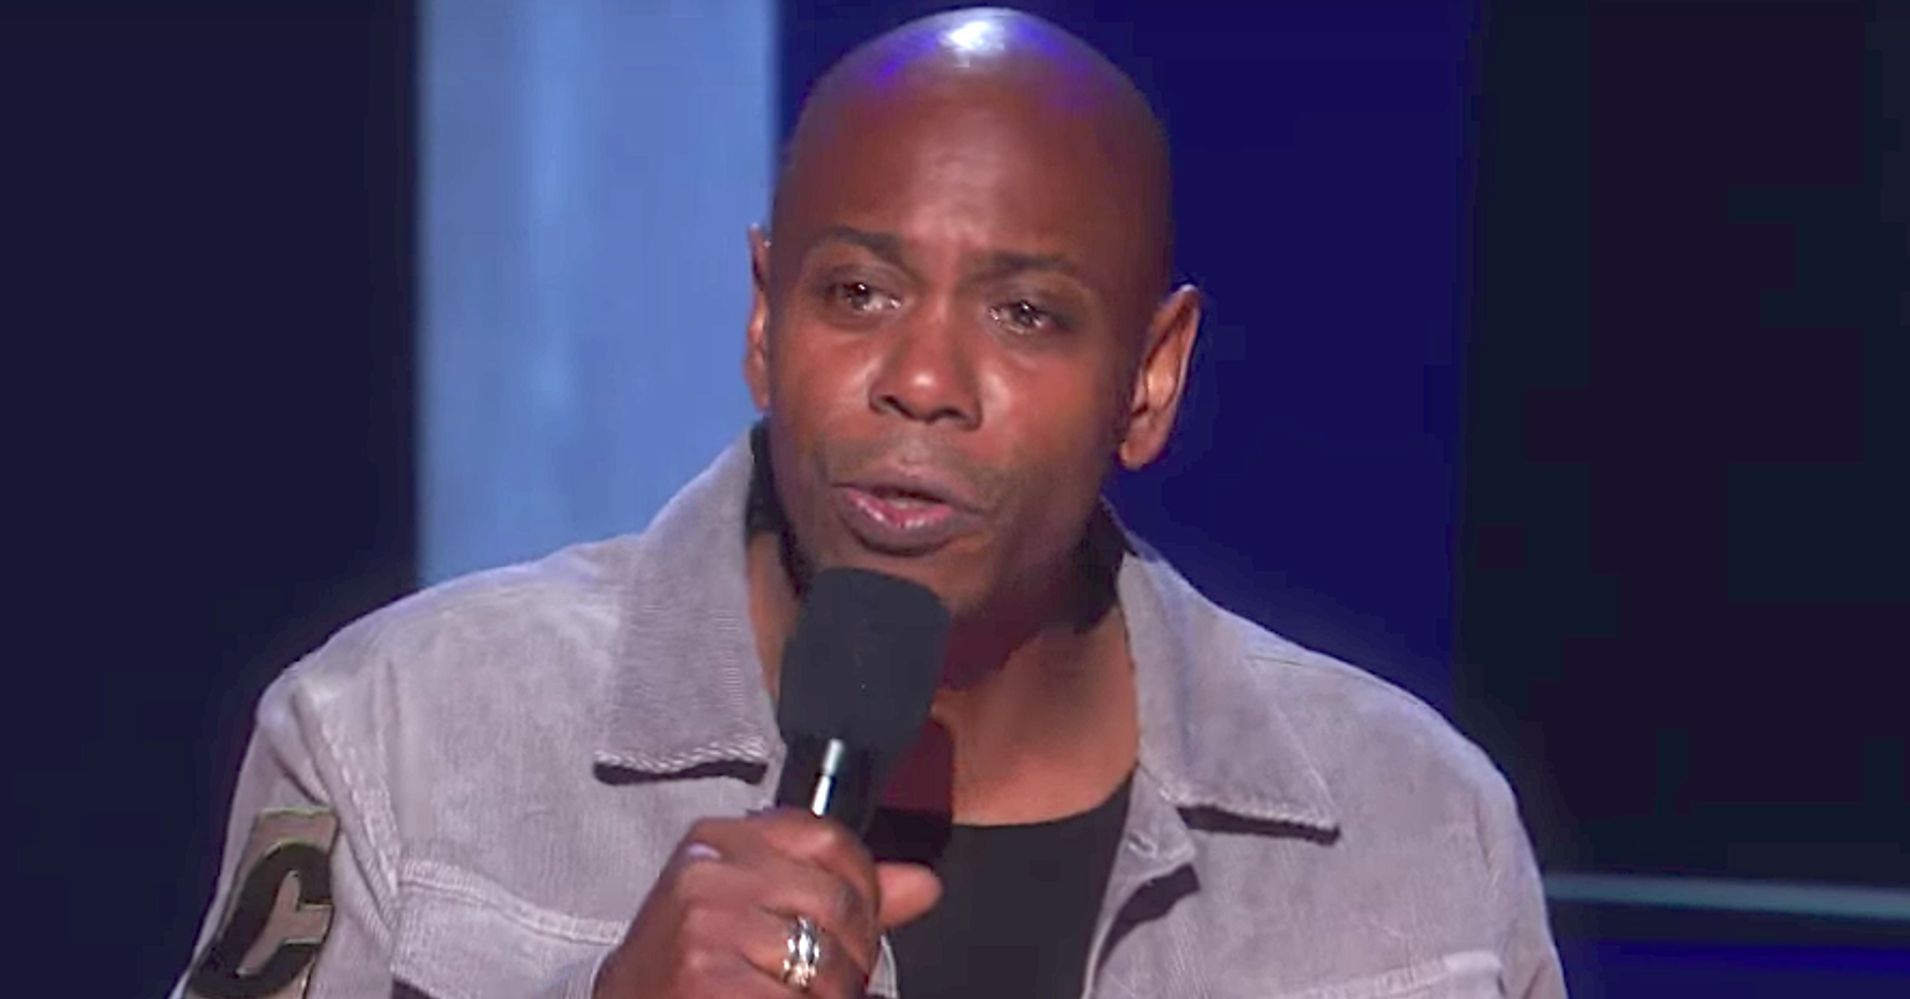 Dave Chappelle Teases Upcoming Netflix Gig With Trump Voters Gag | HuffPost